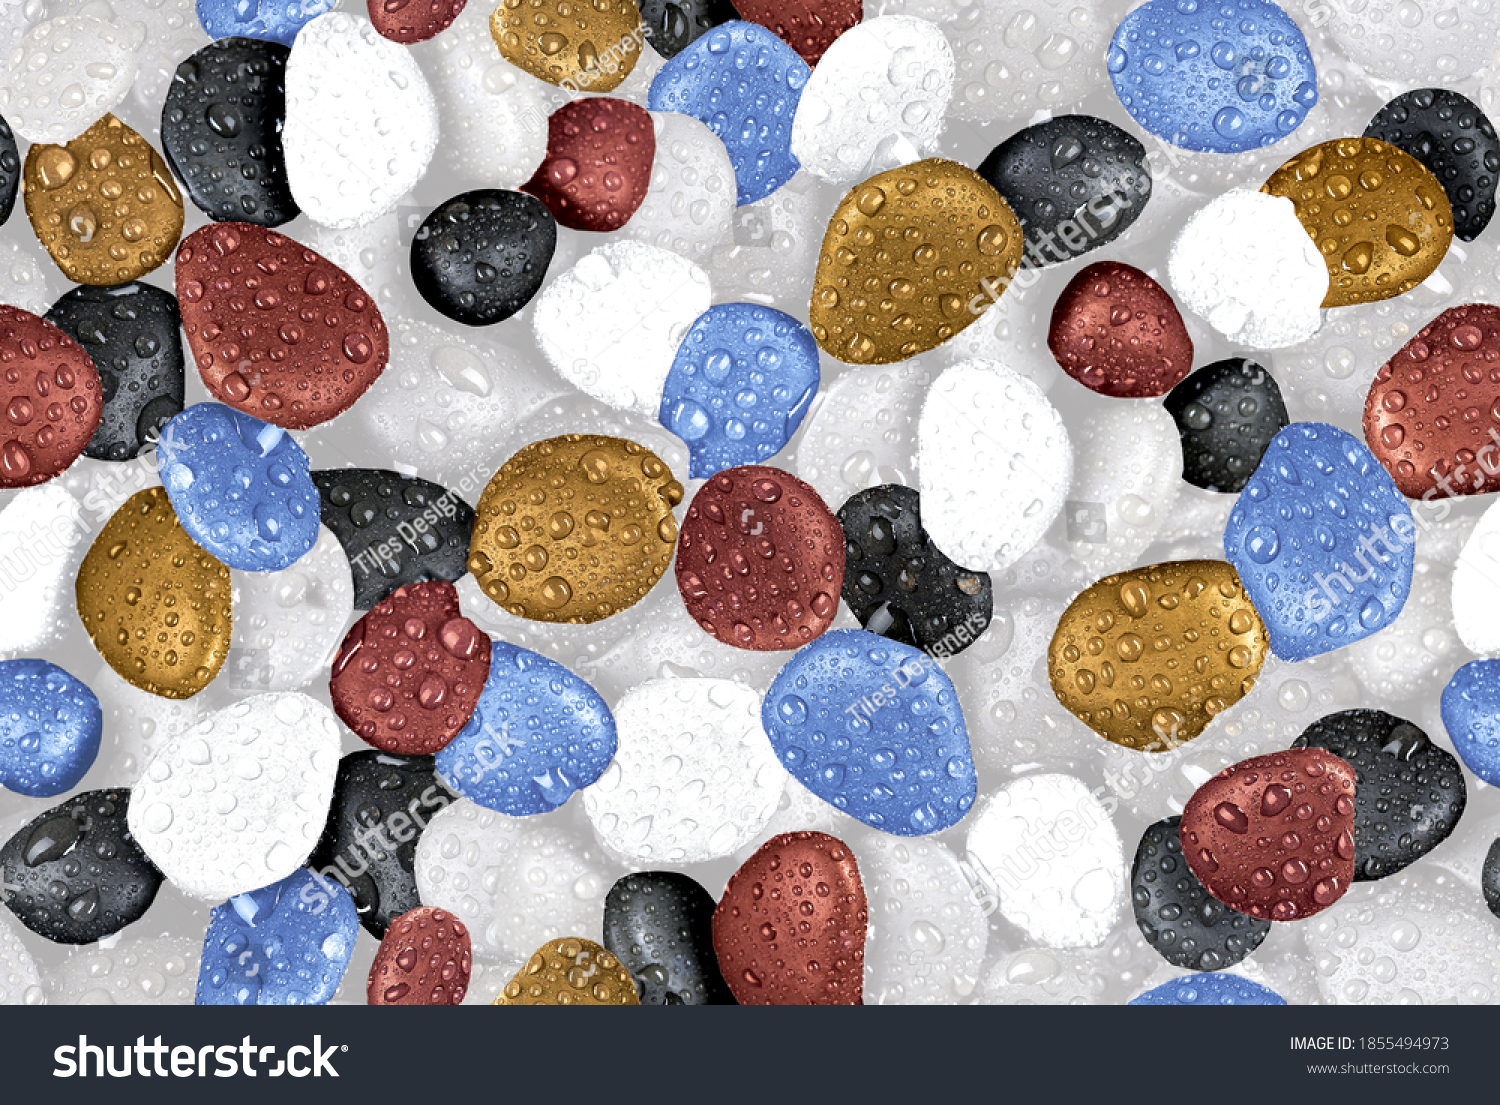 Multi colorful Stone with water Drops, digital wall tiles design #1855494973